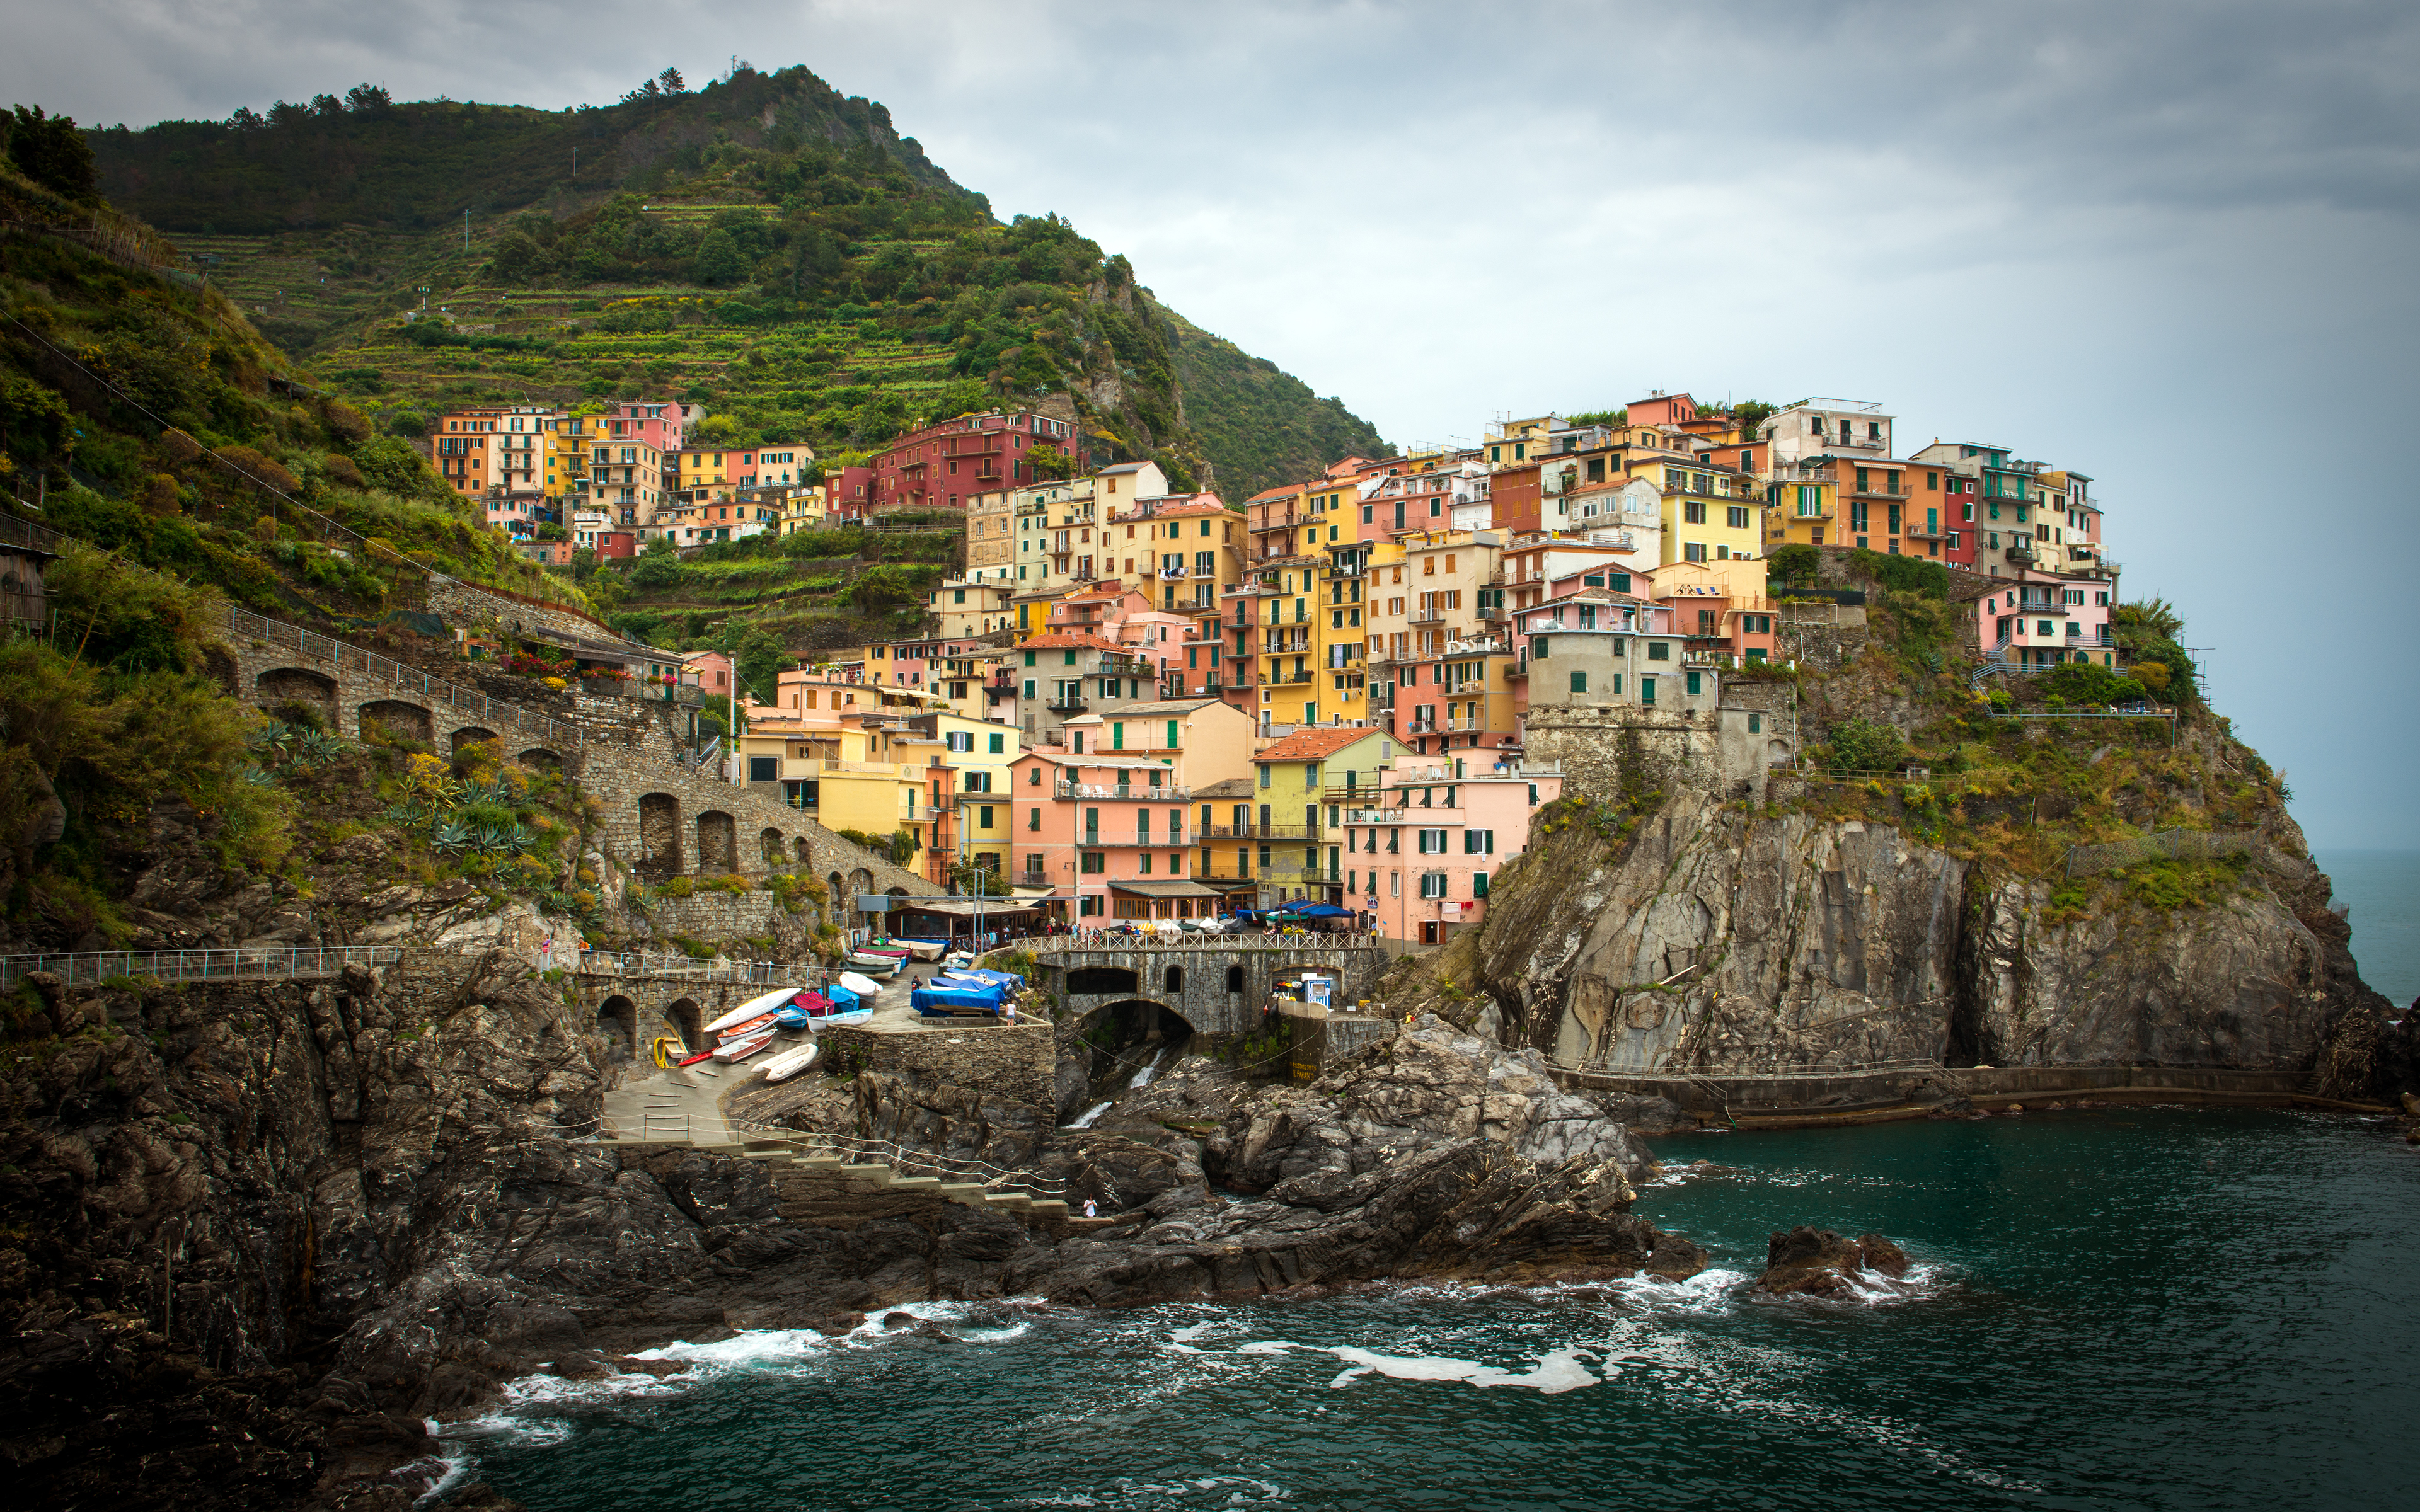 The town of Manarola in Italy wallpapers and images ...